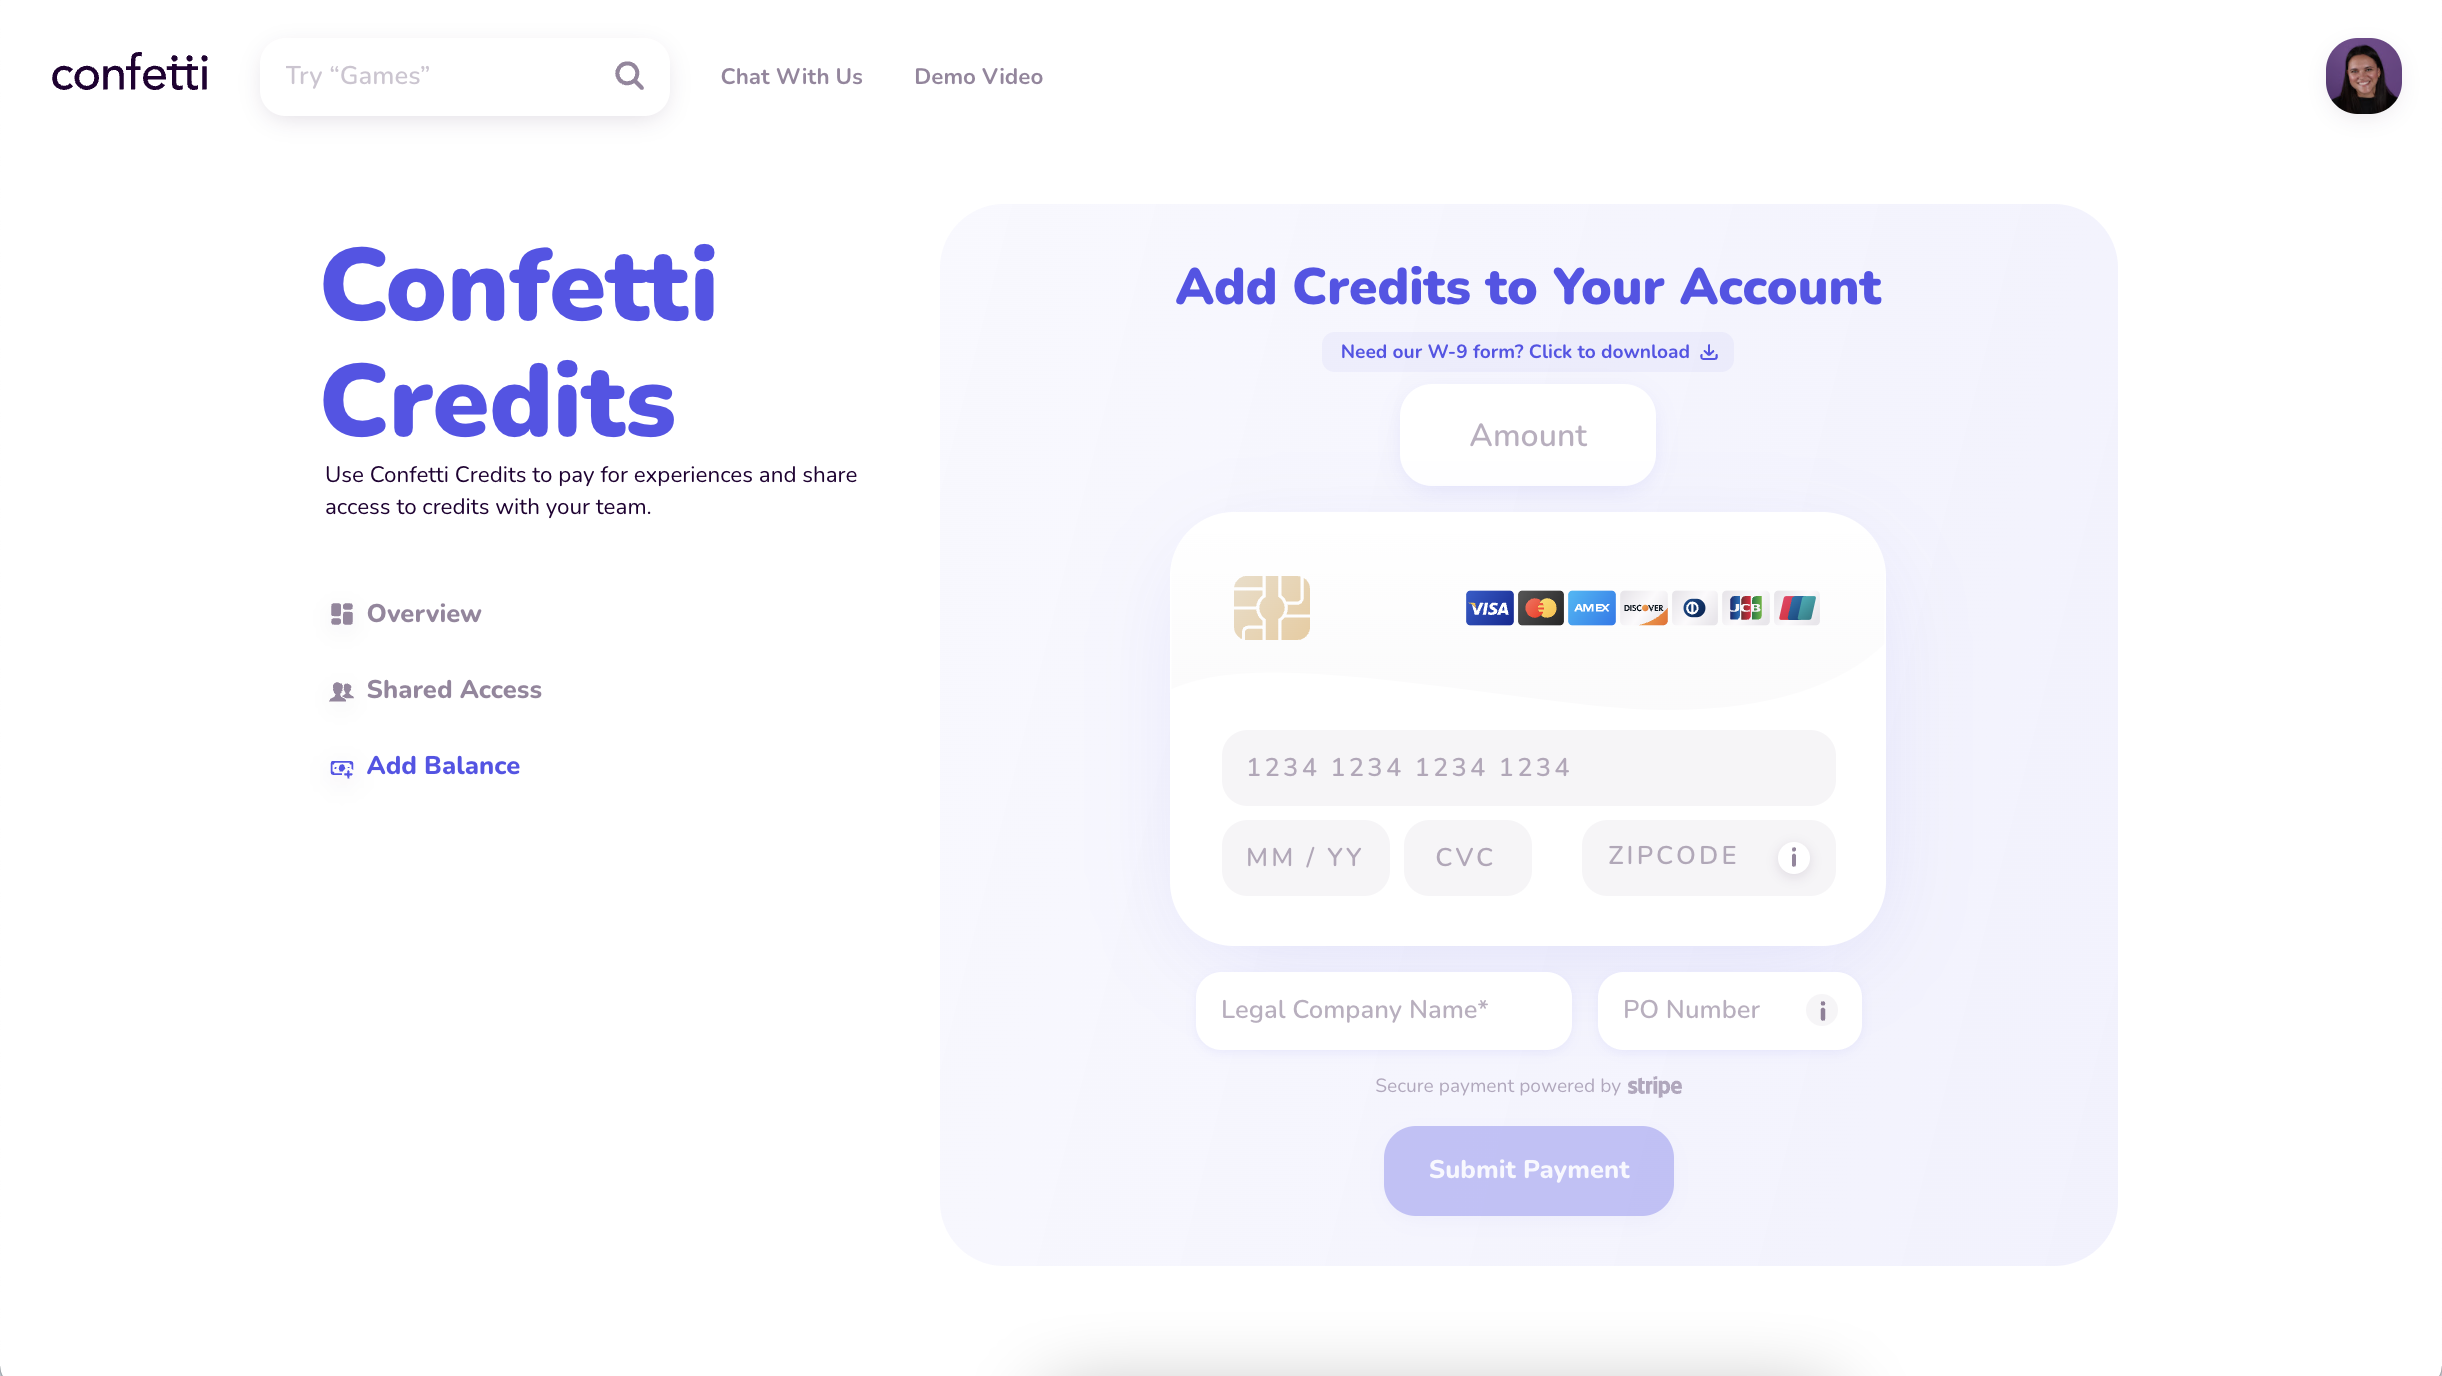 Use Confetti Credits to pay for experiences and share access to credits with your team